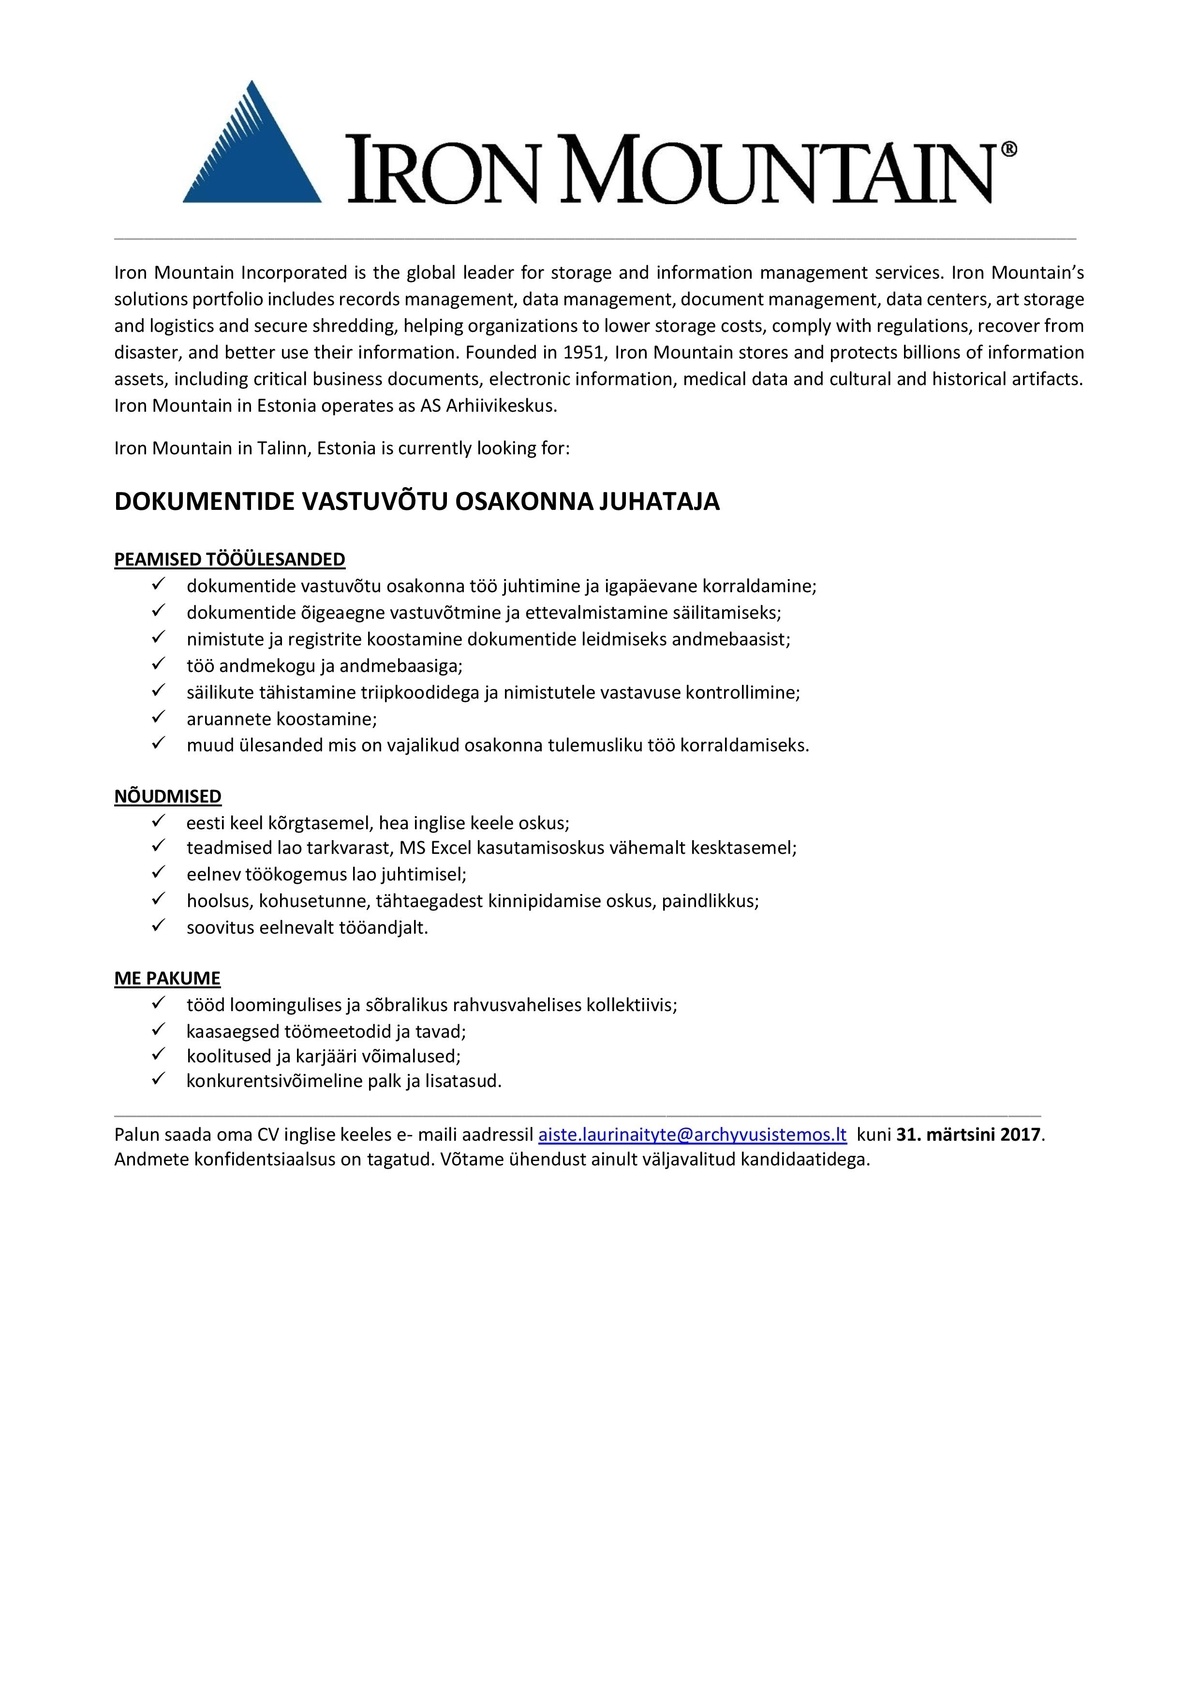 CVKeskus.ee client Document acceptation department manager (work in warehouse)